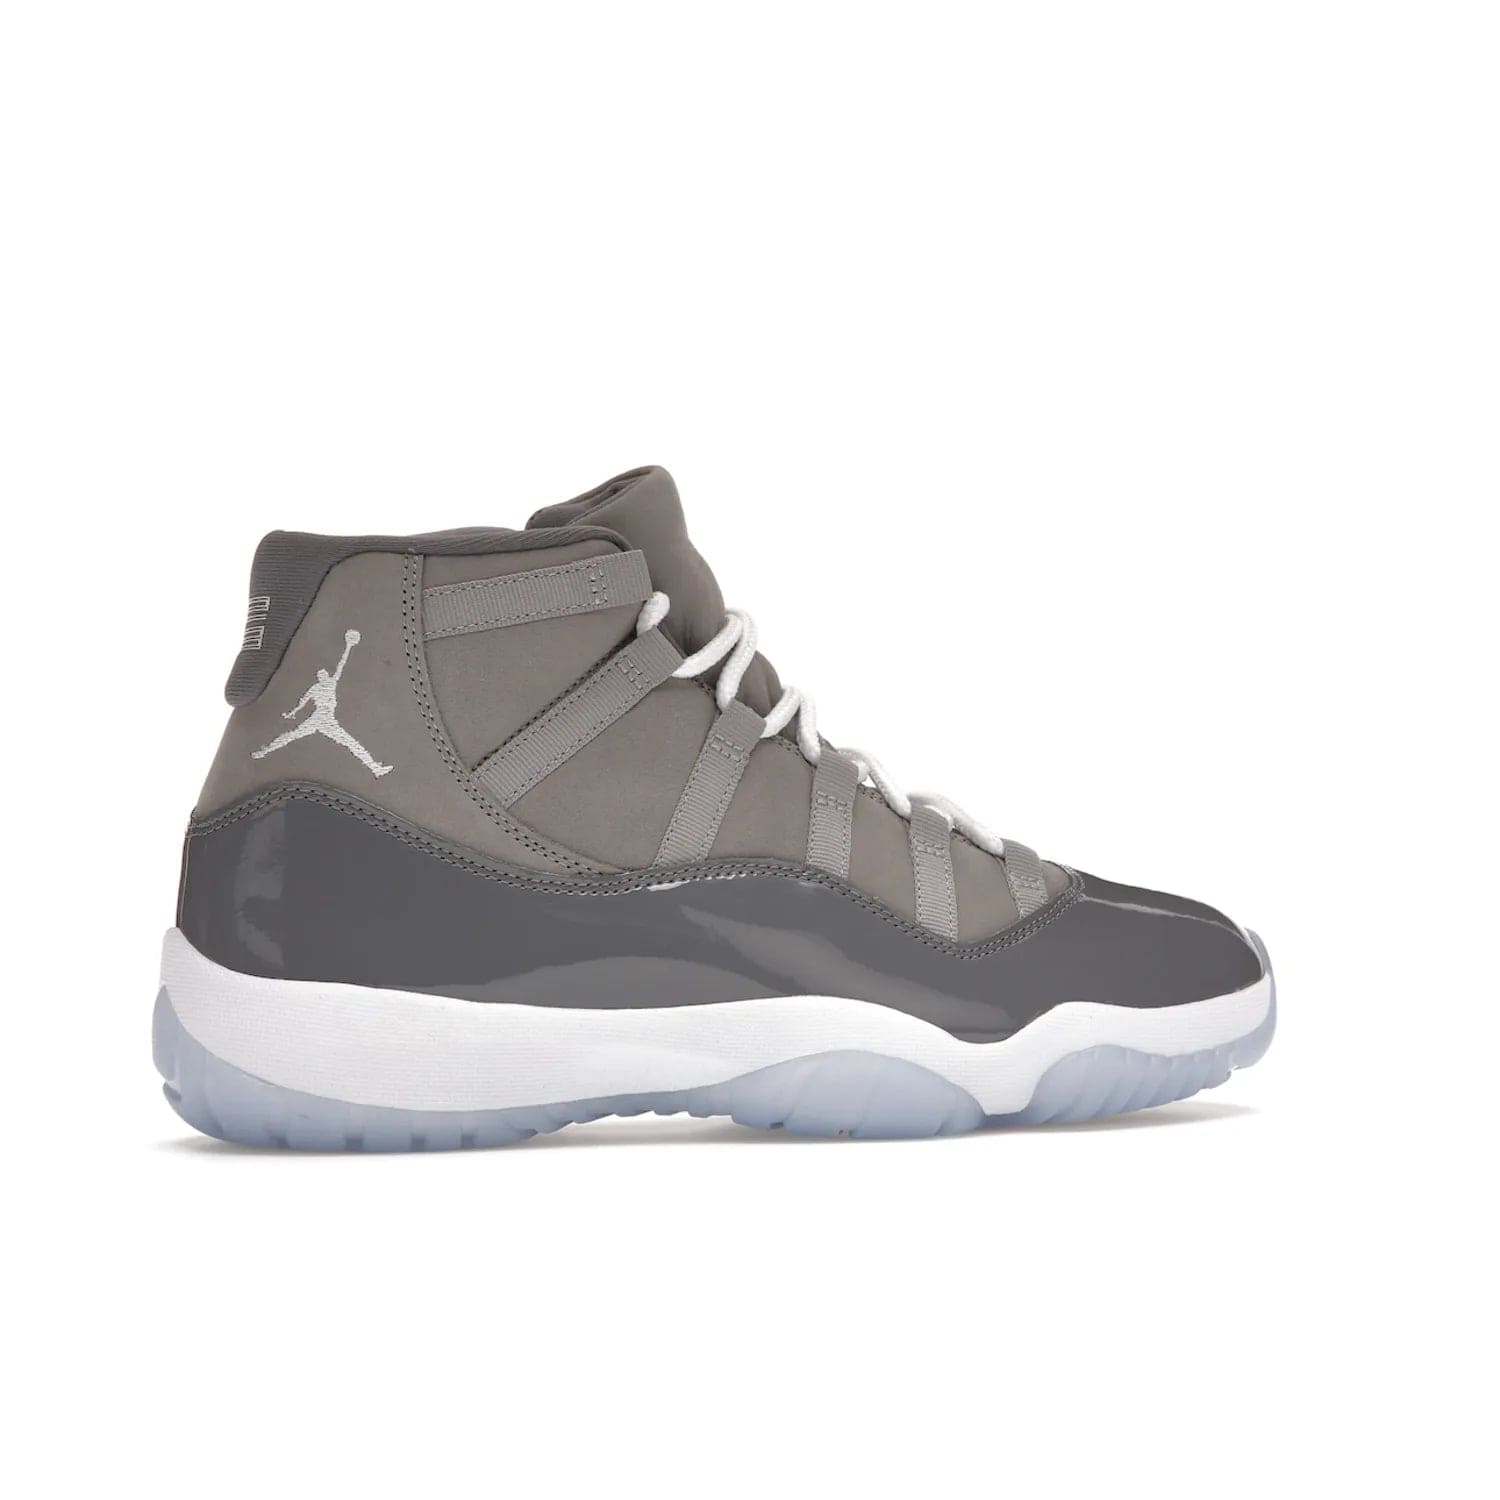 Jordan 11 Retro Cool Grey (2021) - Image 35 - Only at www.BallersClubKickz.com - Shop the Air Jordan 11 Retro Cool Grey (2021) for a must-have sneaker with a Cool Grey Durabuck upper, patent leather overlays, signature Jumpman embroidery, a white midsole, icy blue translucent outsole, and Multi-Color accents.  Released in December 2021 for $225.